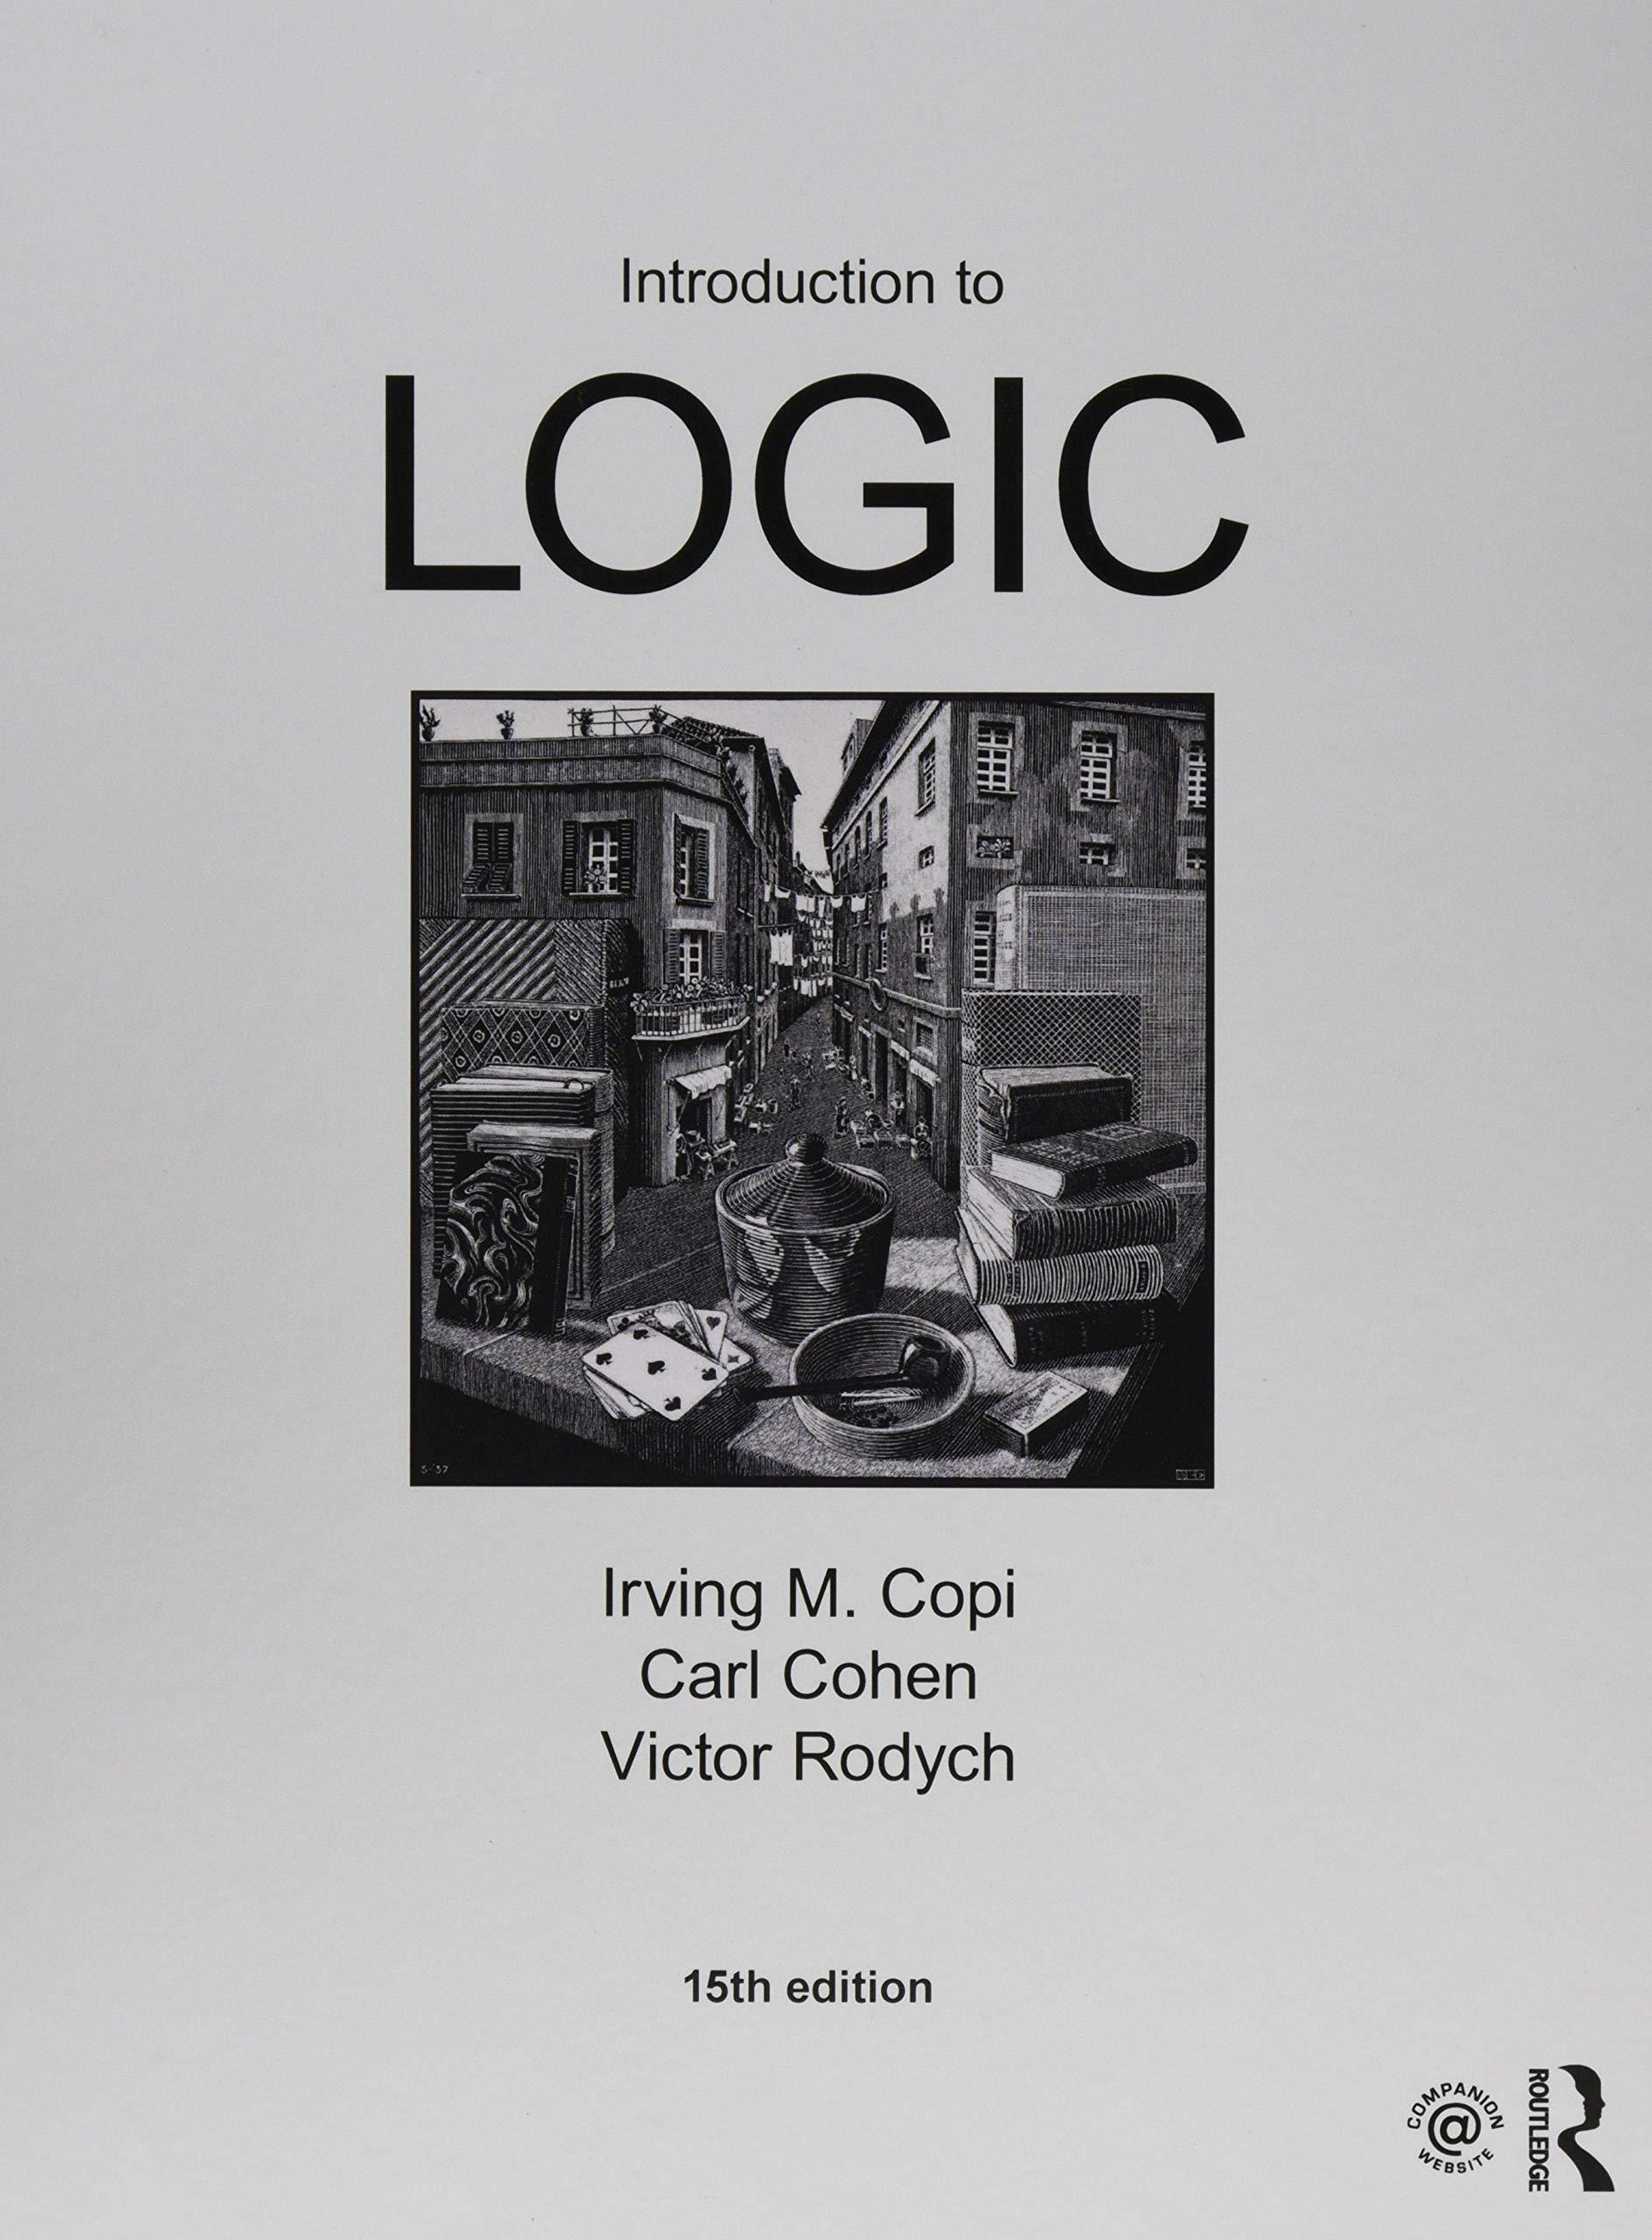 introduction to logic 15th edition irving m. copi, carl cohen, victor rodych 1138500860, 9781138500860